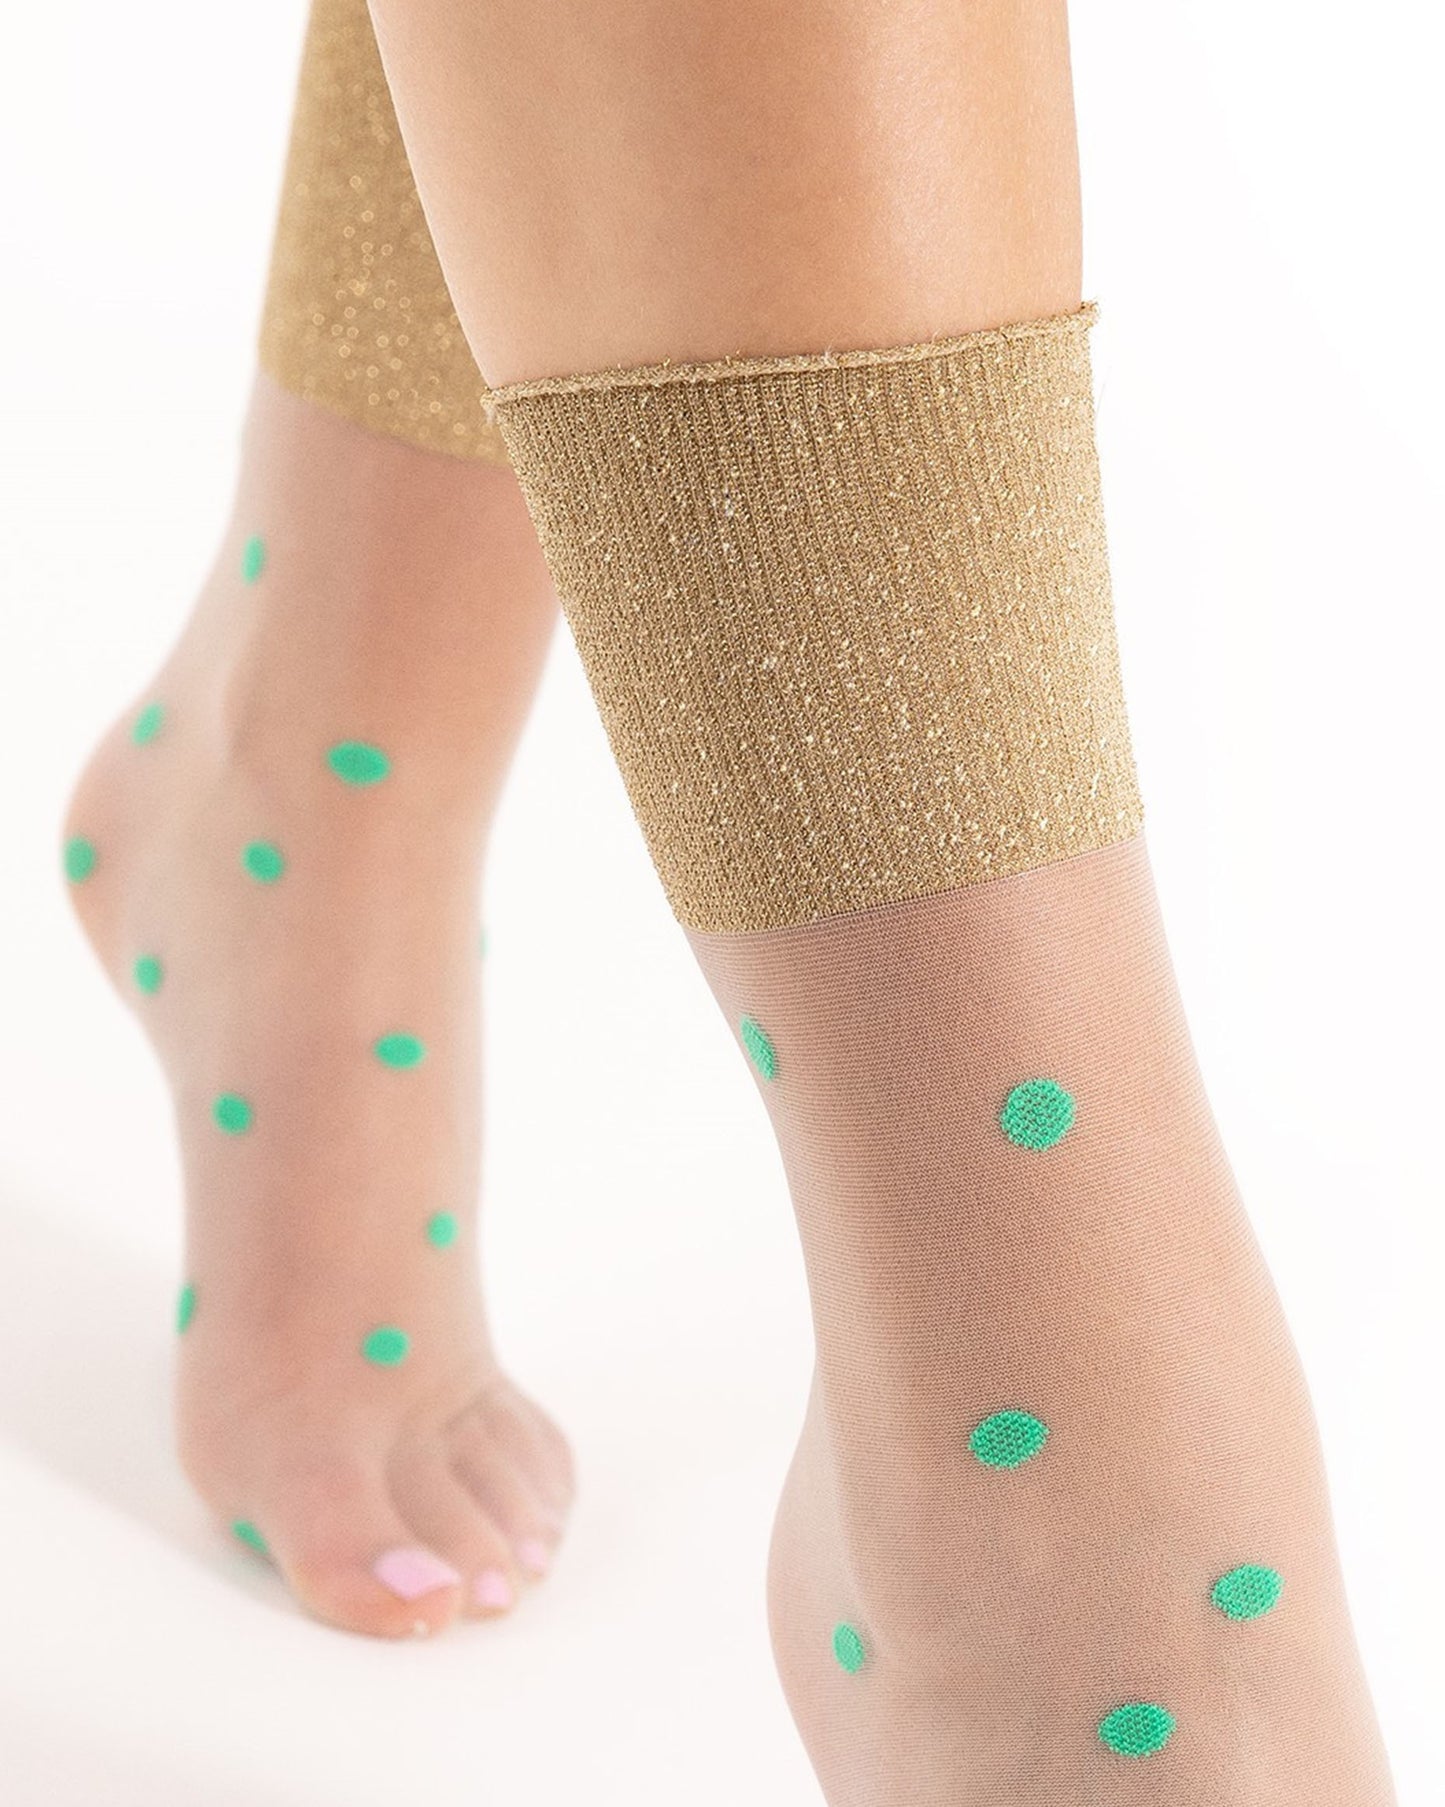 Fiore Broadway Sock - Sheer nude fashion ankle socks with bright green spot pattern and deep sparkly lamé cuff.